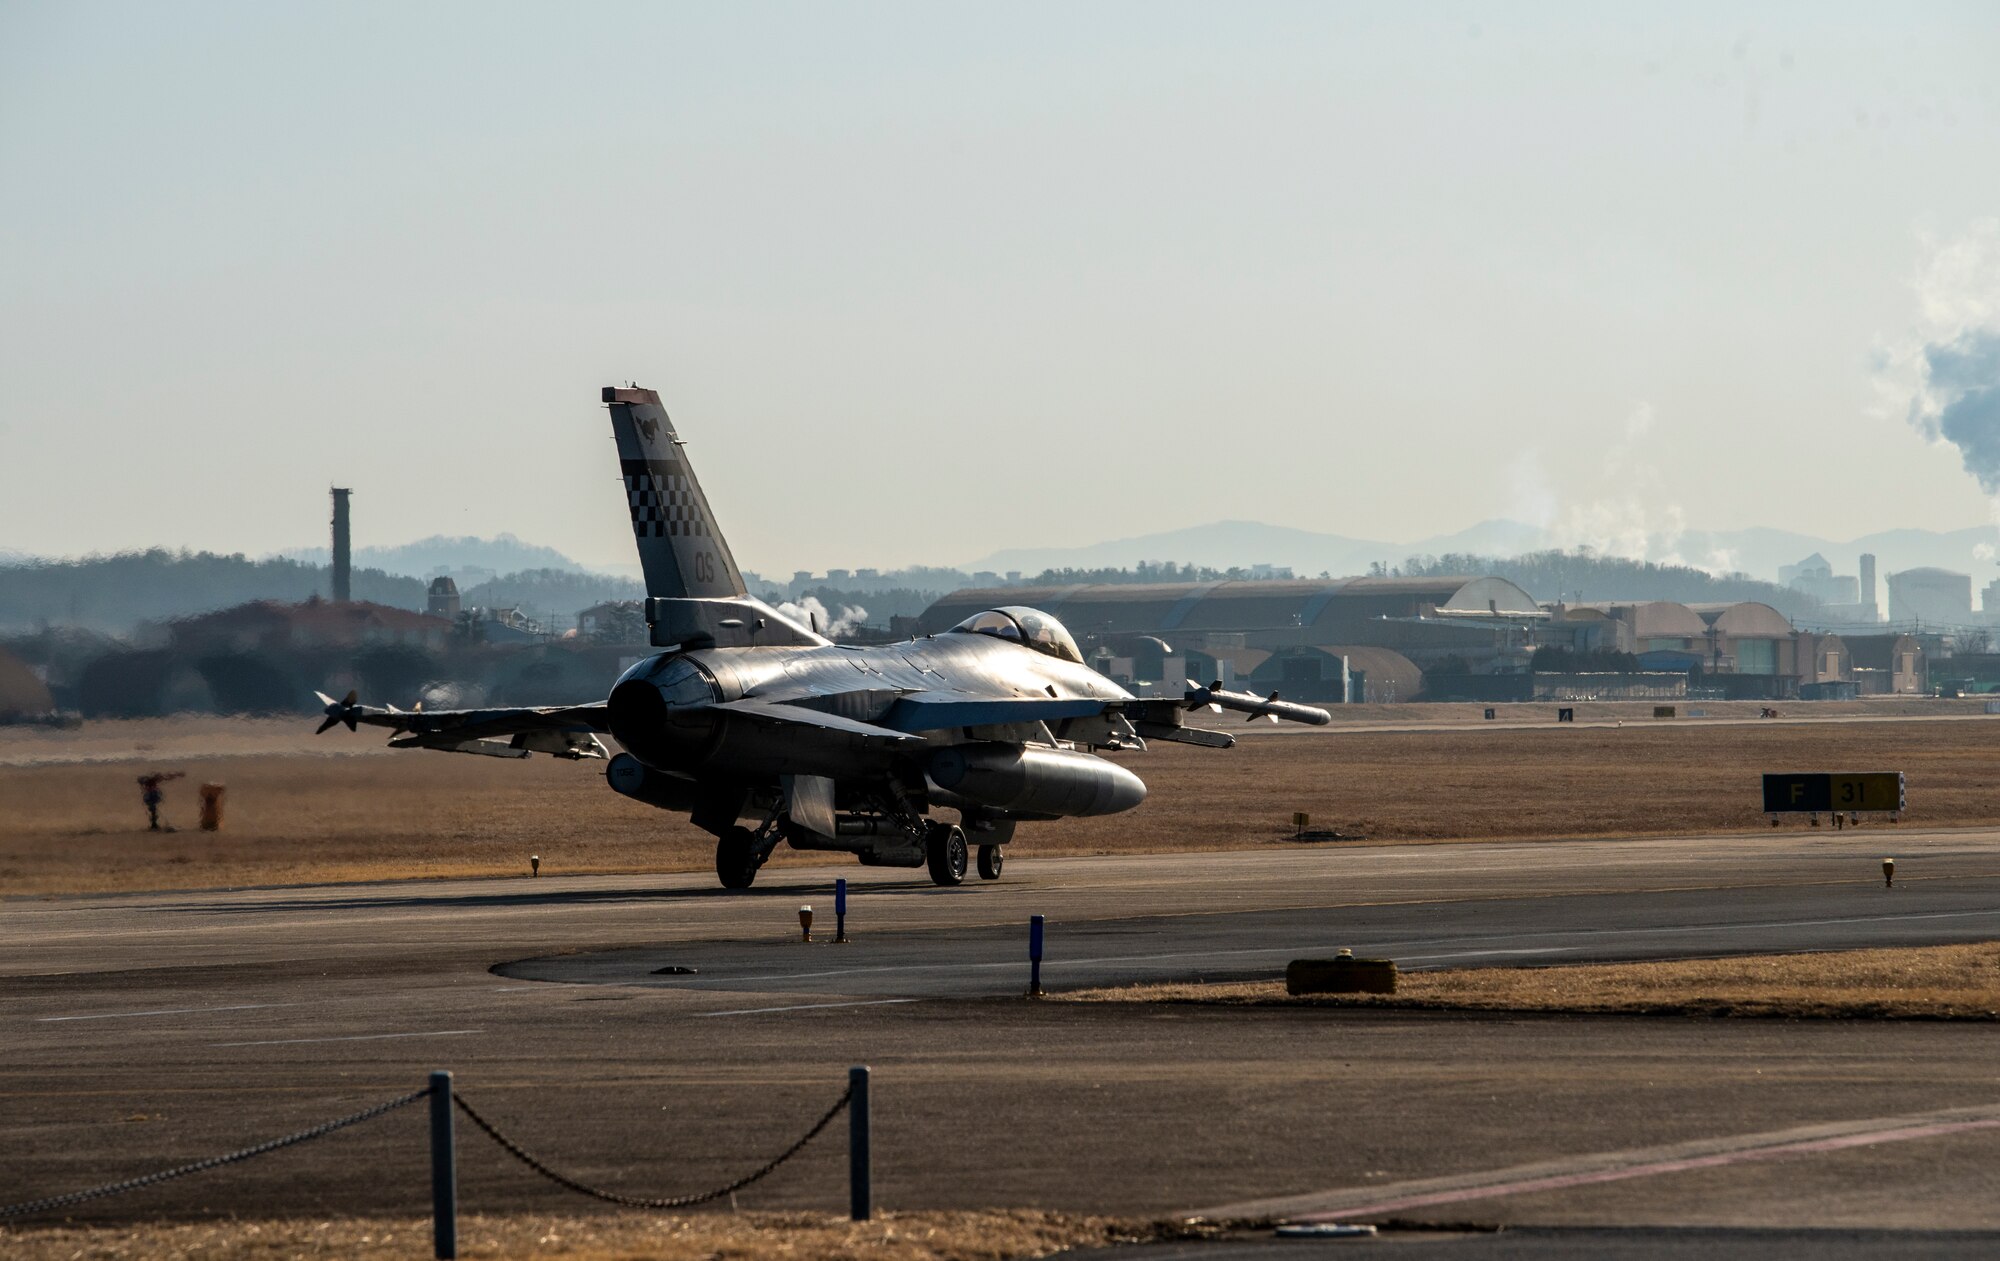 A U.S. Air Force F-16 Fighting Falcon, 36th Fighter Squadron, taxis on the runway before flight during a training event at Daegu Air Base, Republic of Korea, Jan. 31, 2023.